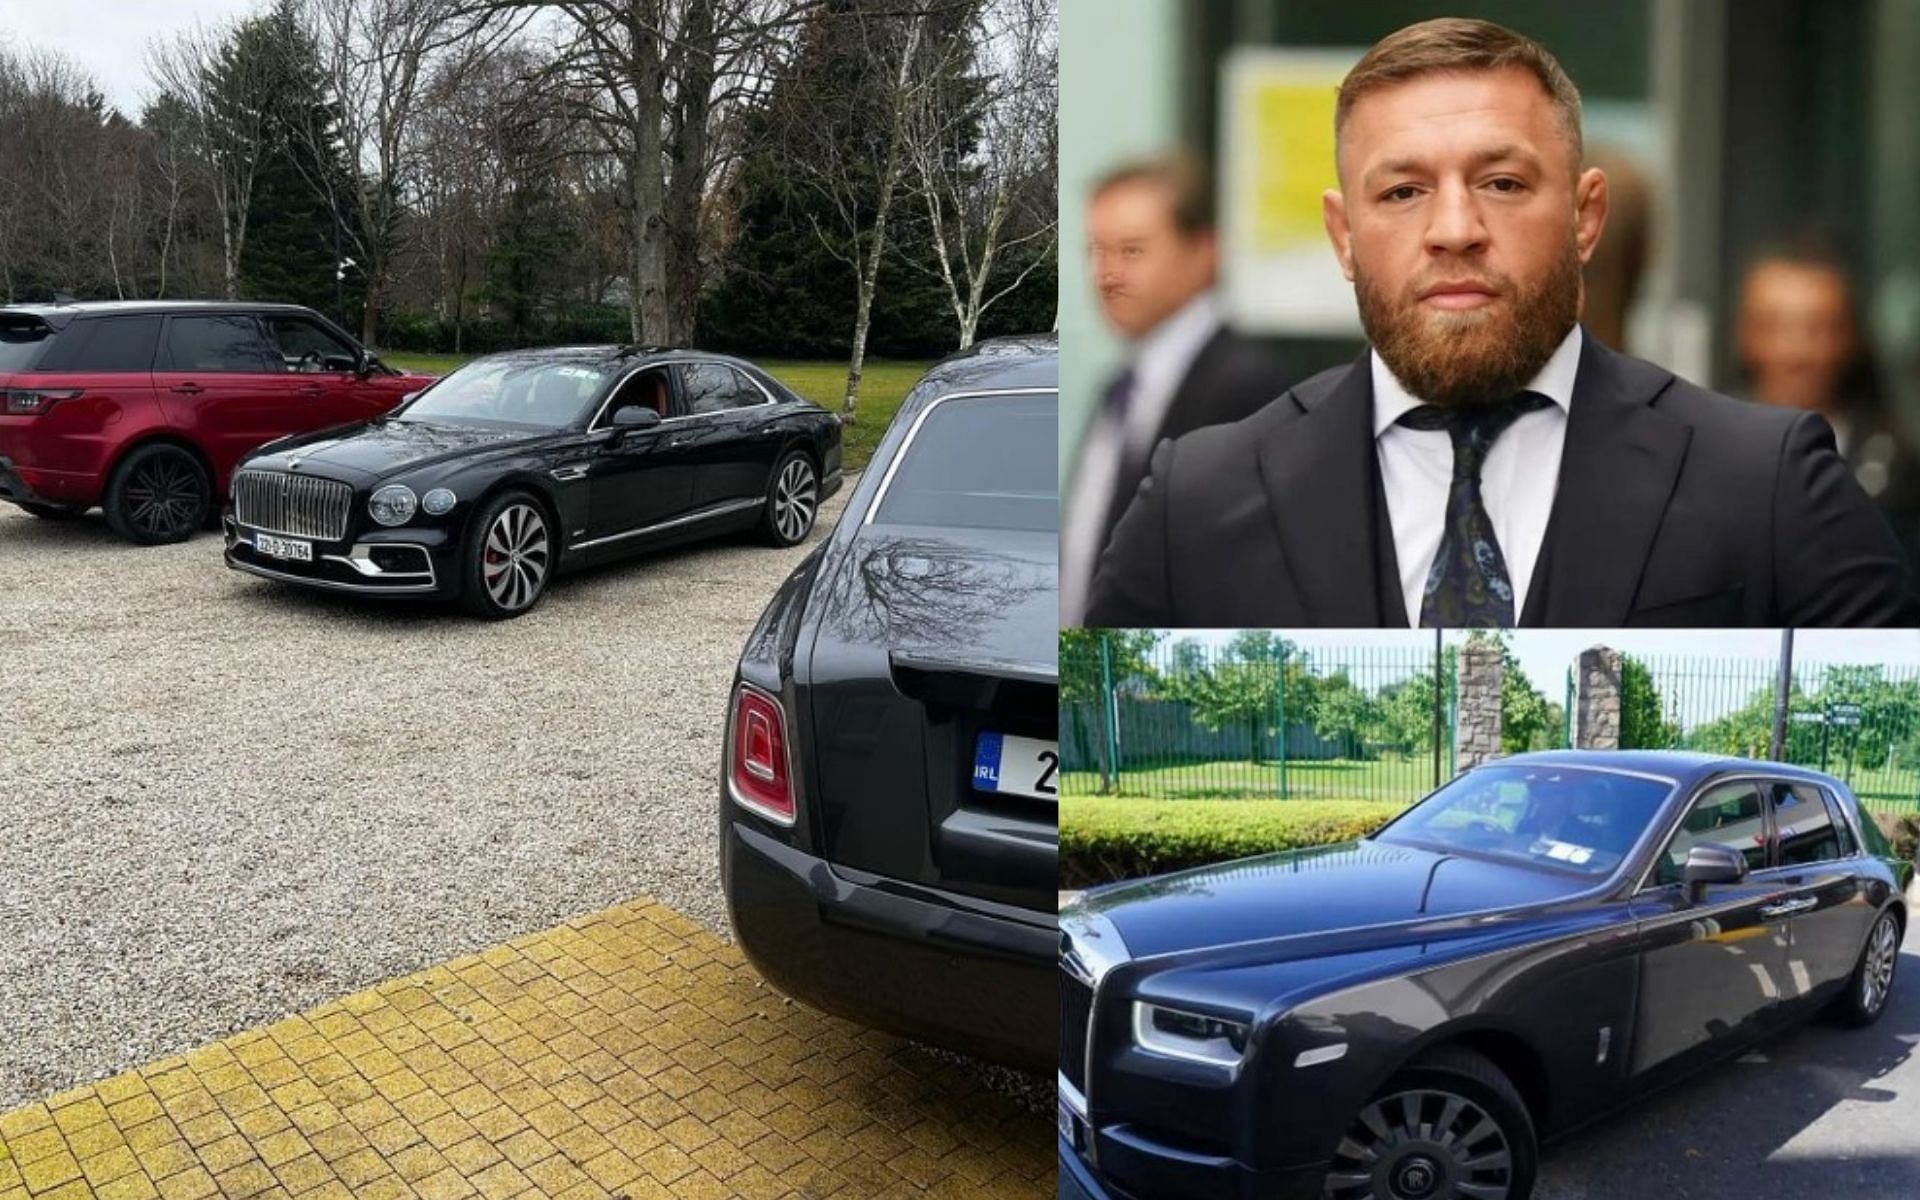 Conor McGregor and several of his cars [Images Courtesy: @thenotoriousmma on Instagram]